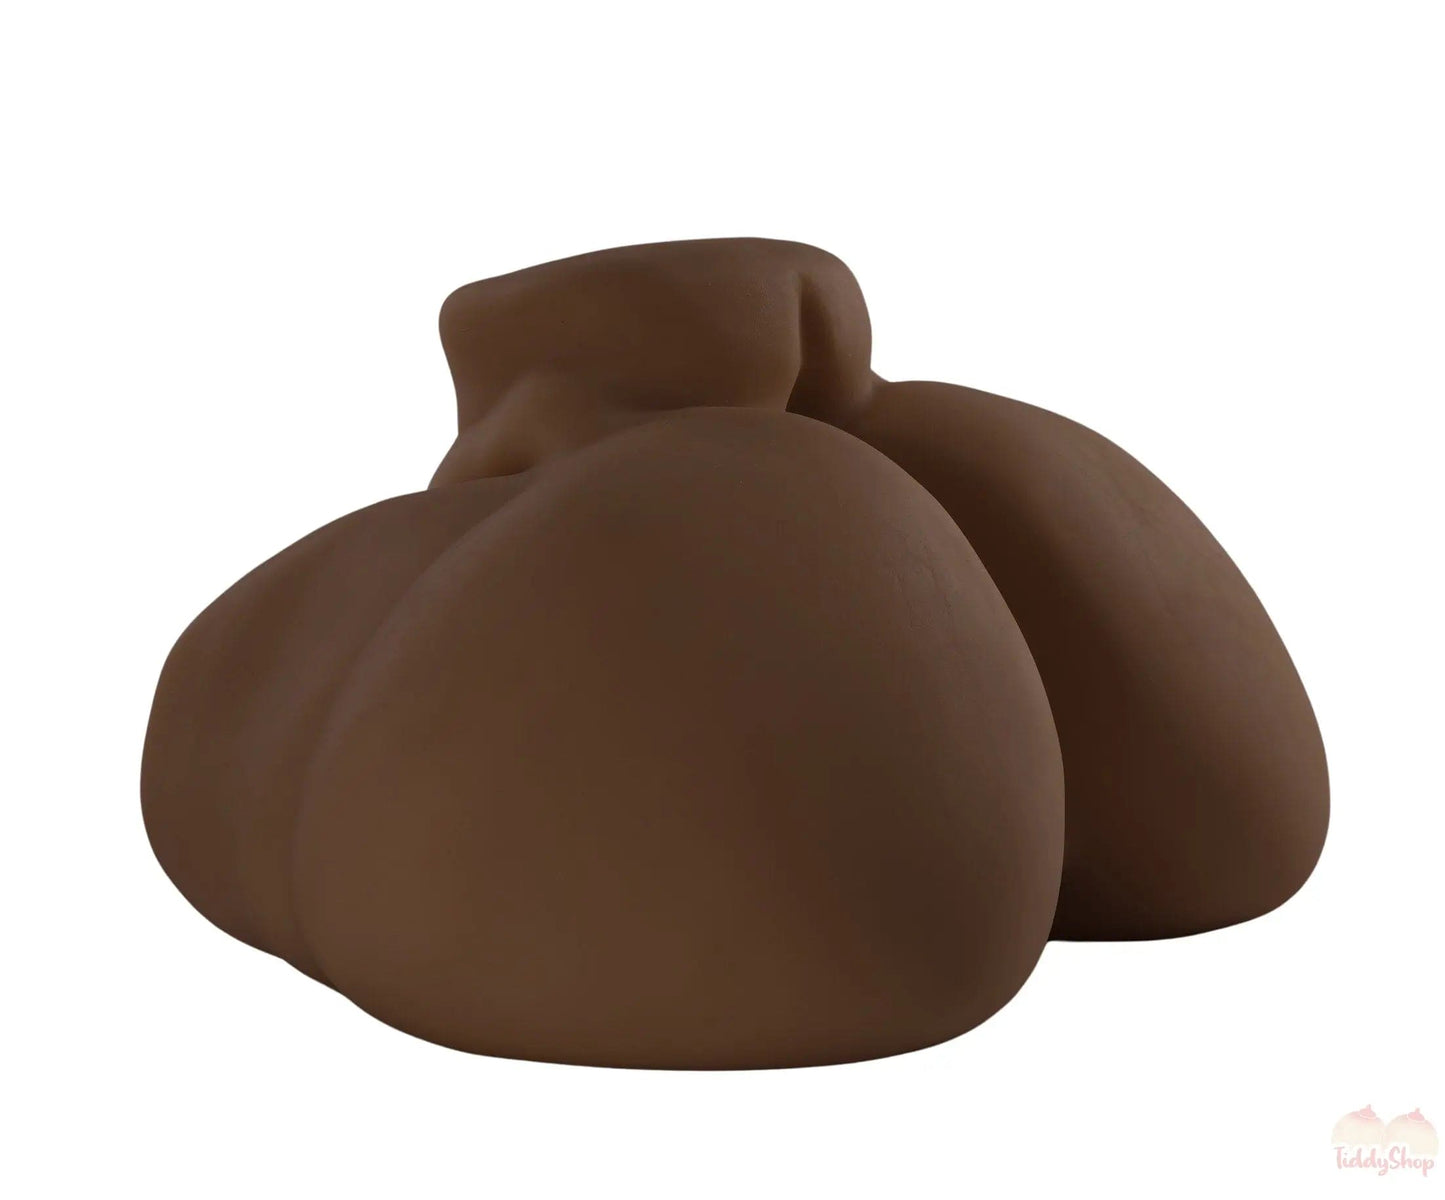 TiddyShop Heavenly Madame Squishable - JelloJiggles BBW Pear Gigantic Ass 94lb (43 kg)  - Extremely Jiggly Huge Booty Giant Butt Hip Toy Onahole - TiddyDollHouse TiddyShop Ebony-Fully-Gel-Filled-in-first-video-No-added-col